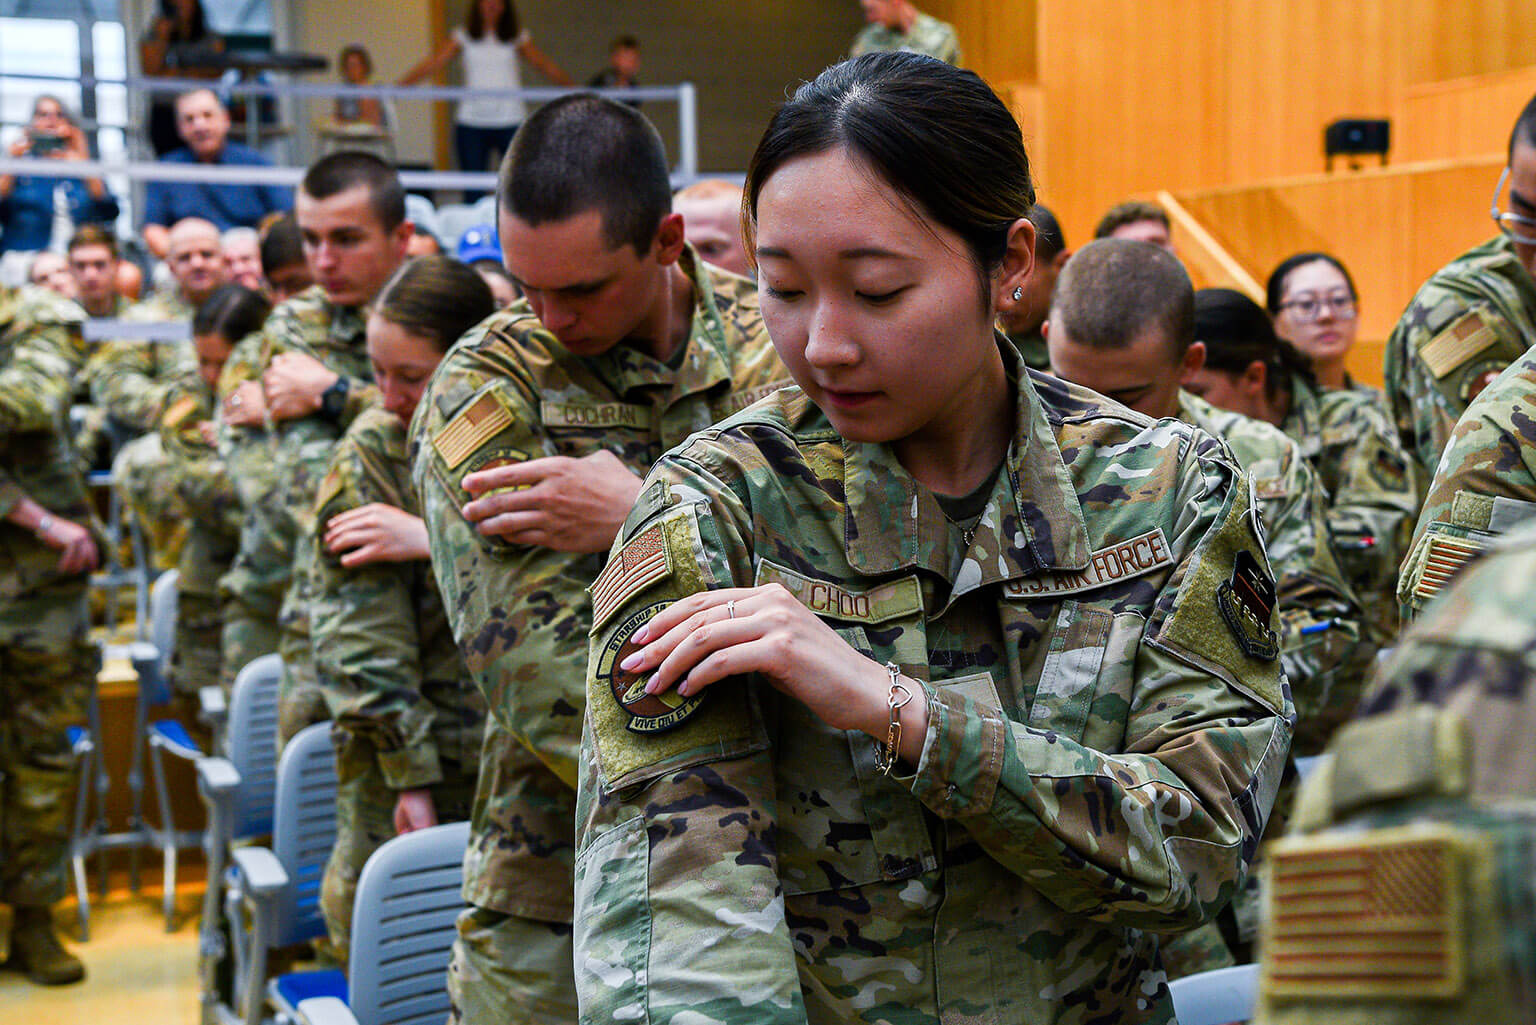 U.S. Air Force Academy Cadet 2nd Class Charlotte Choo puts on her new Cadet Squadron 19 patch